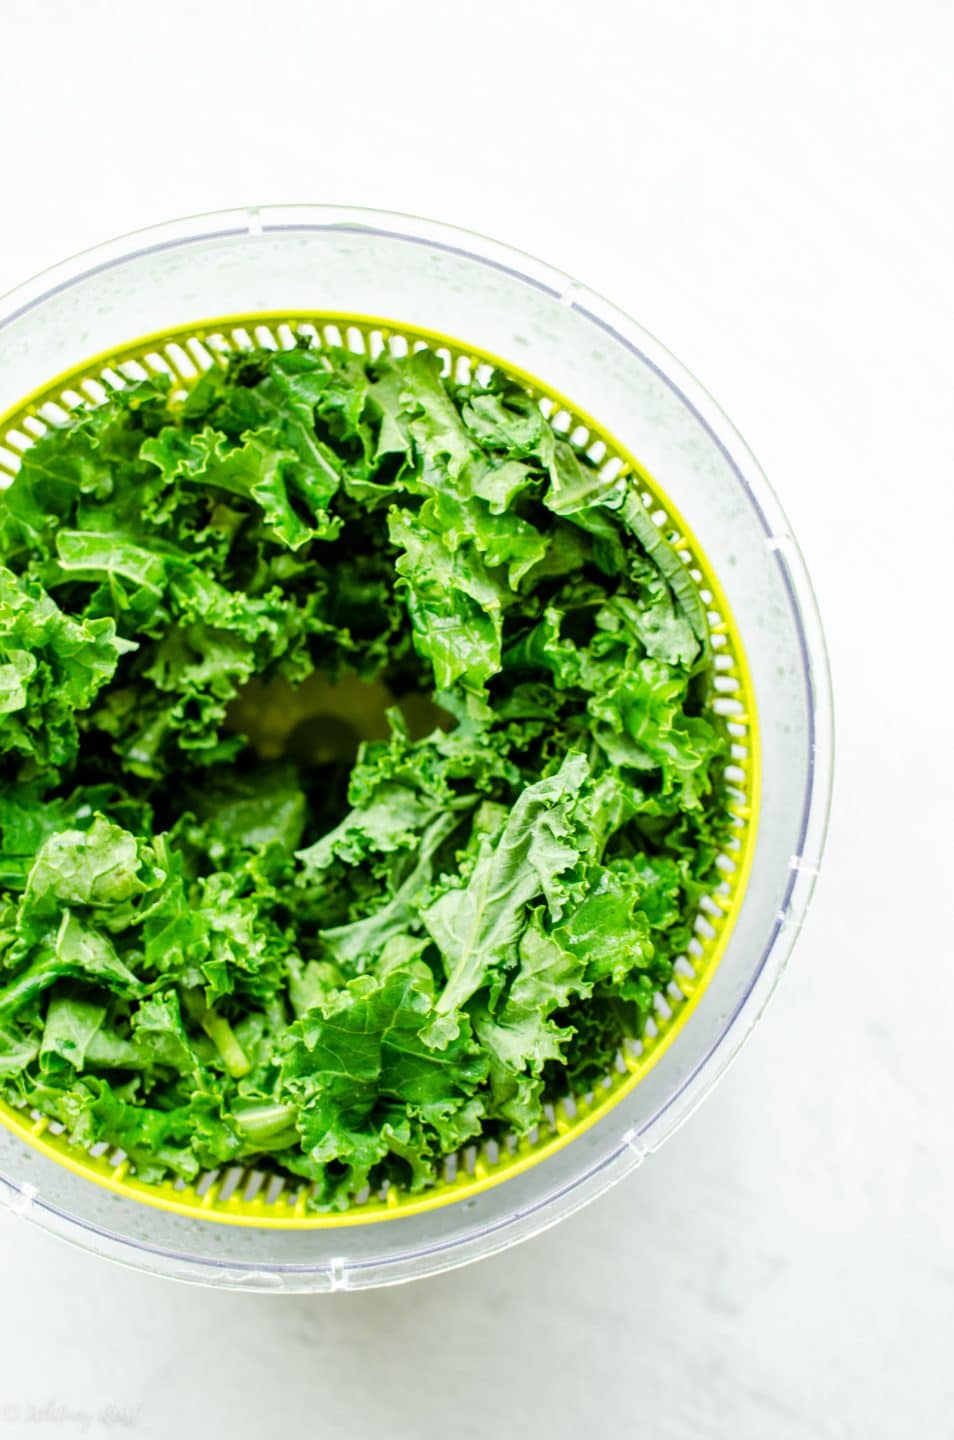 A salad spinner filled with kale on a white stone surface.